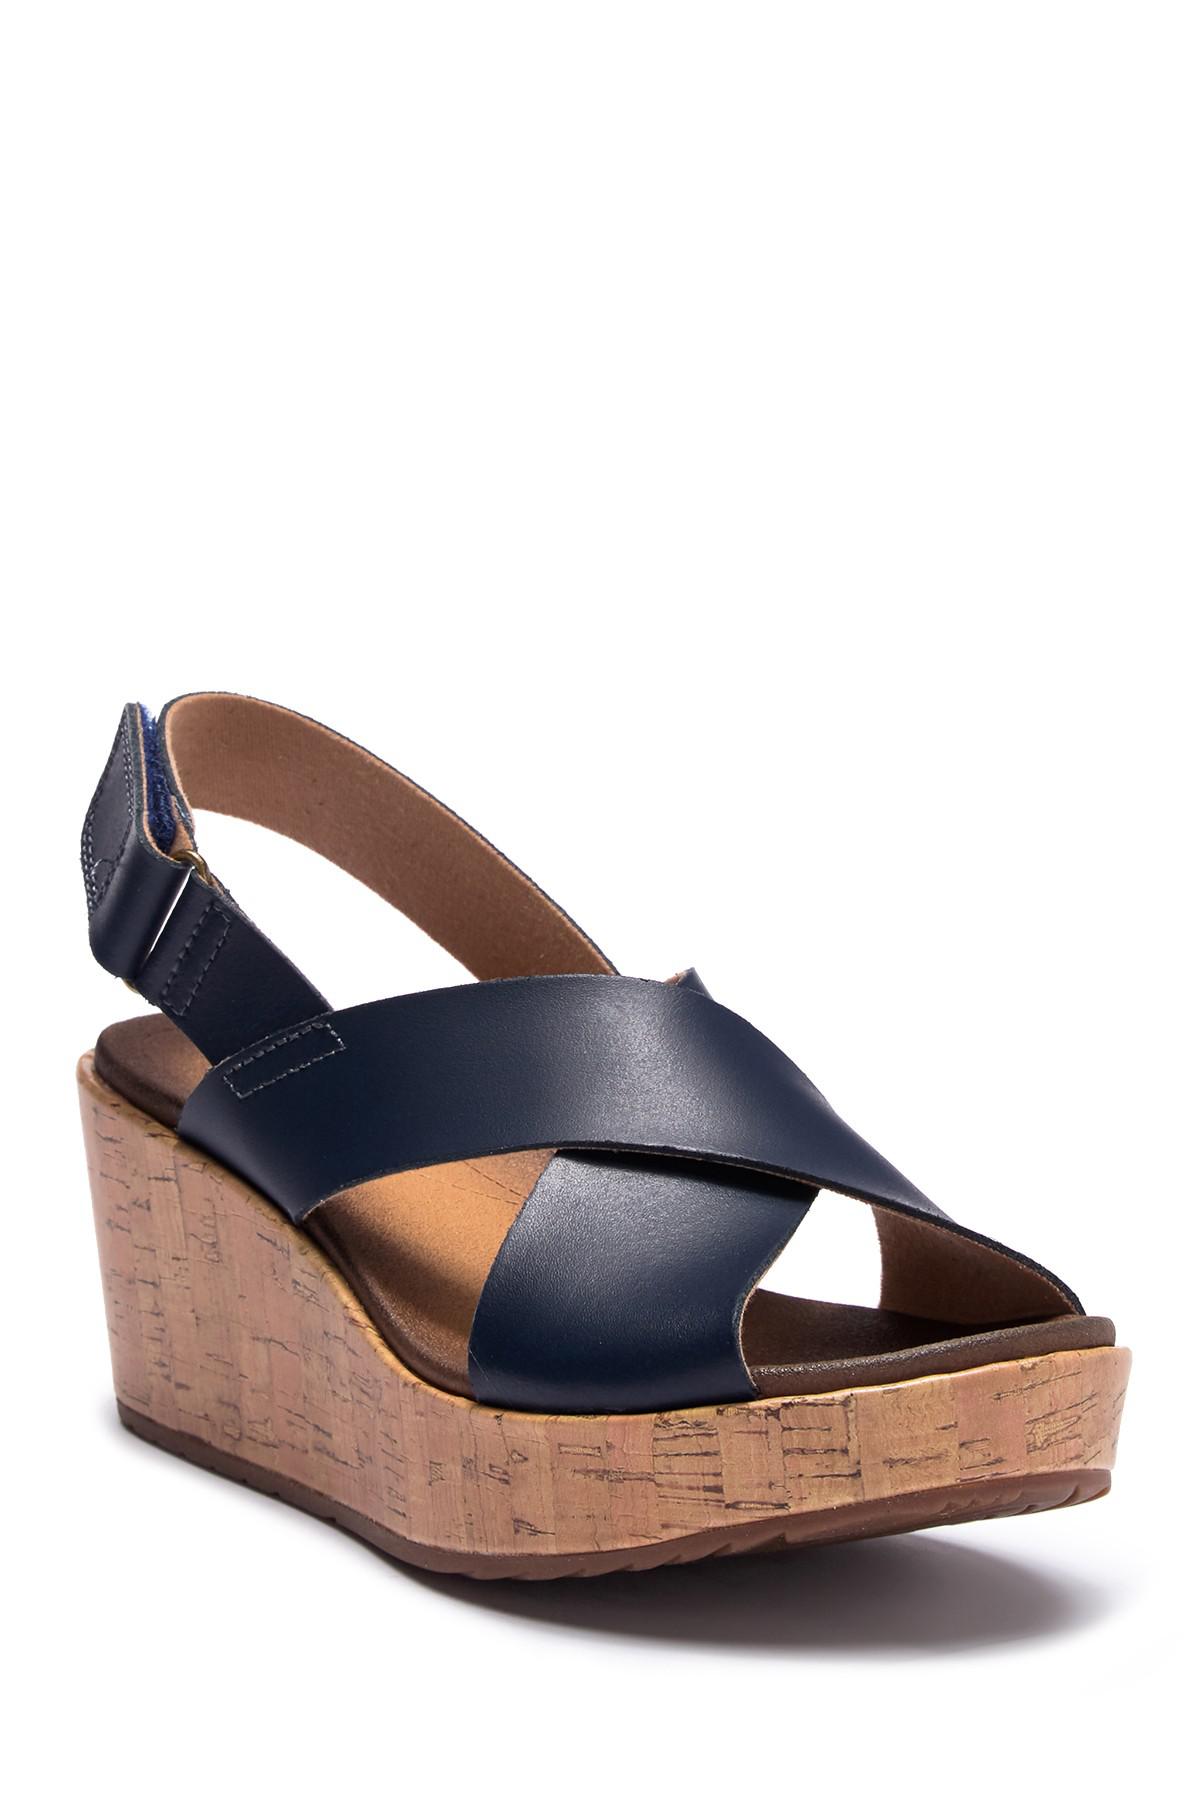 Clarks Stasha Hale Leather Wedge Sandal - Wide Width Available in Blue |  Lyst